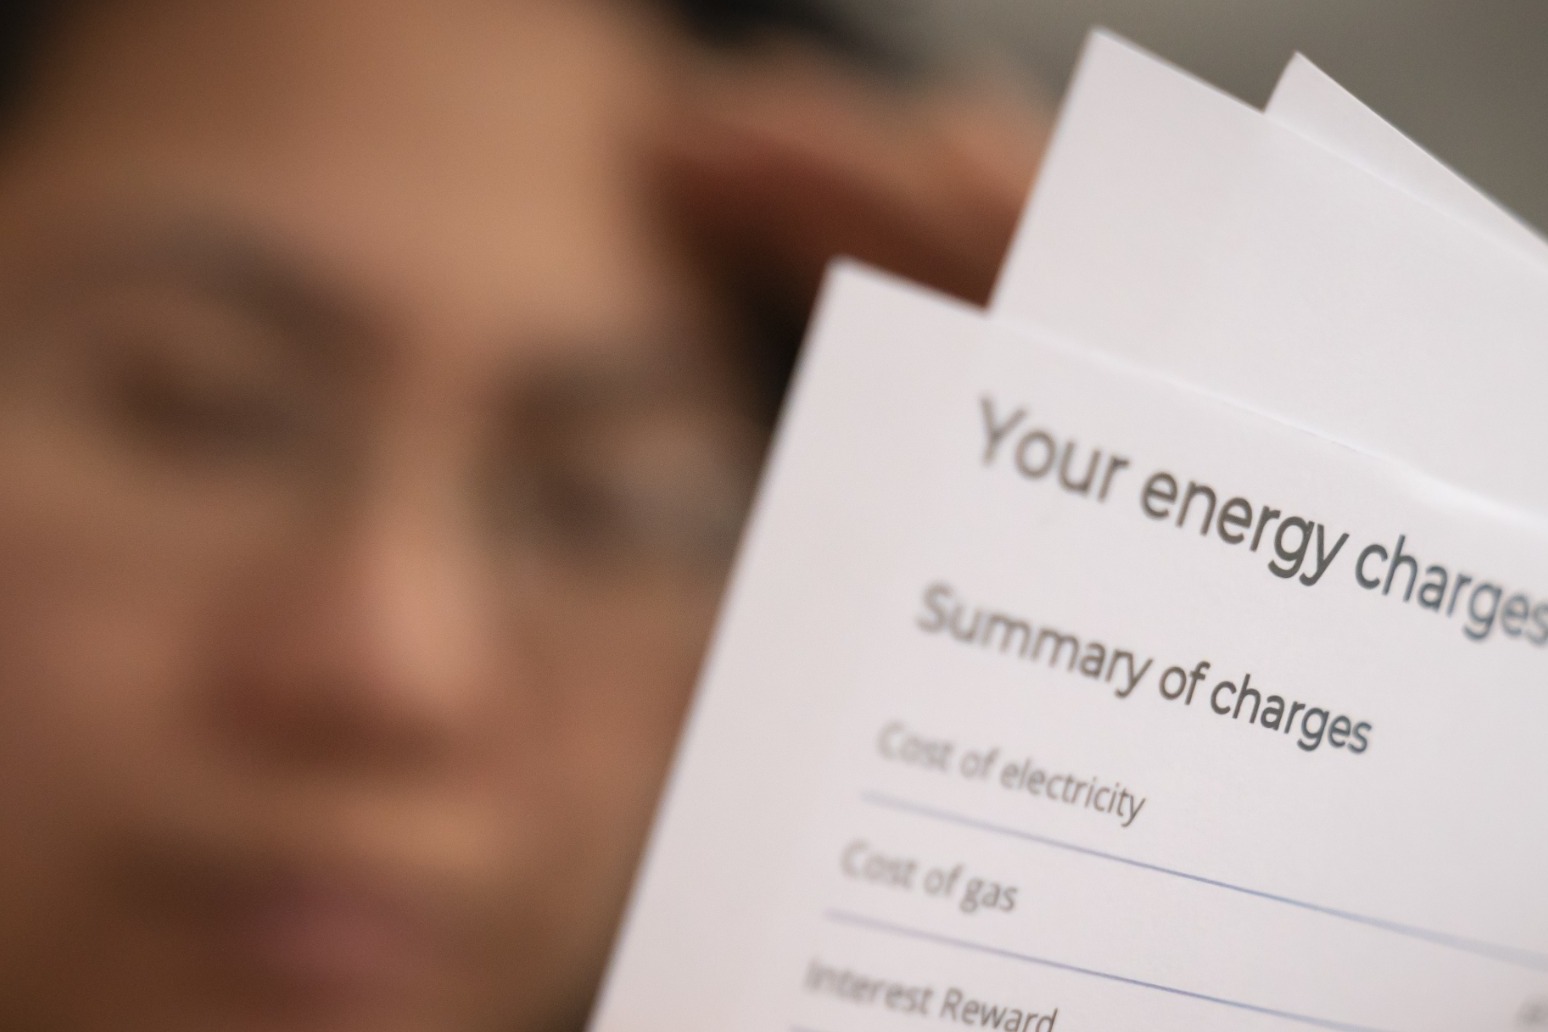 Most energy suppliers must improve help for struggling customers, warns Ofgem 